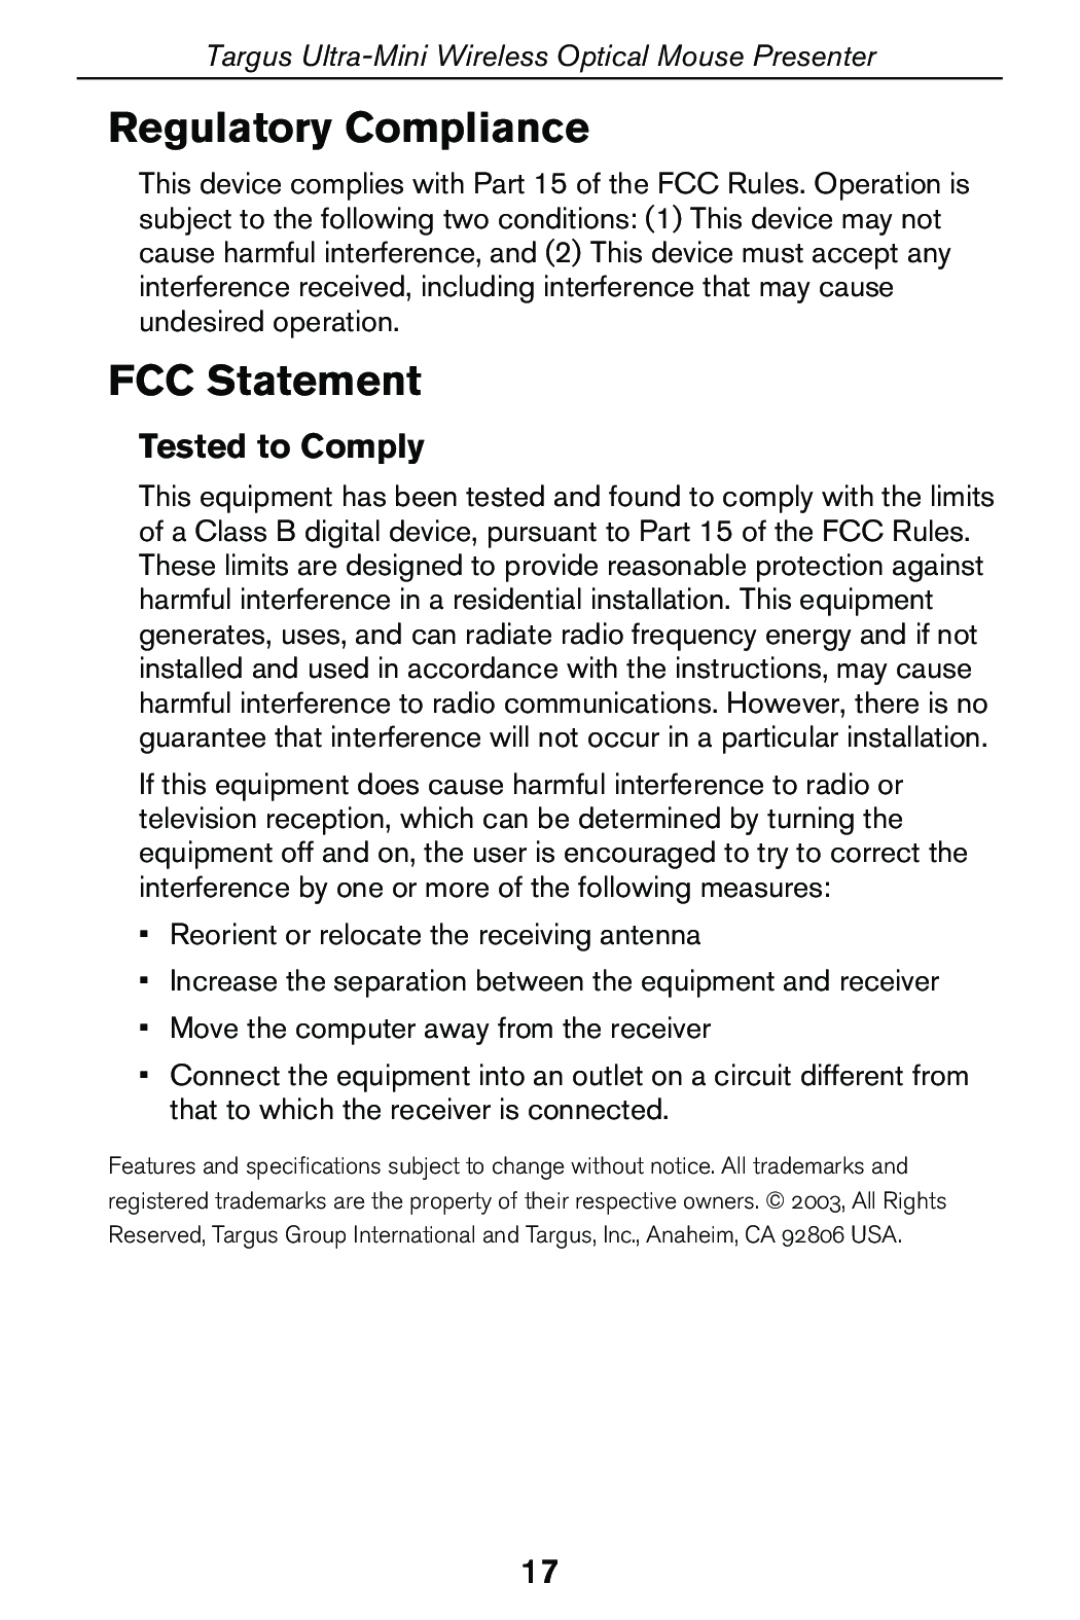 Targus 400-0140-001A specifications Regulatory Compliance, FCC Statement, Tested to Comply 